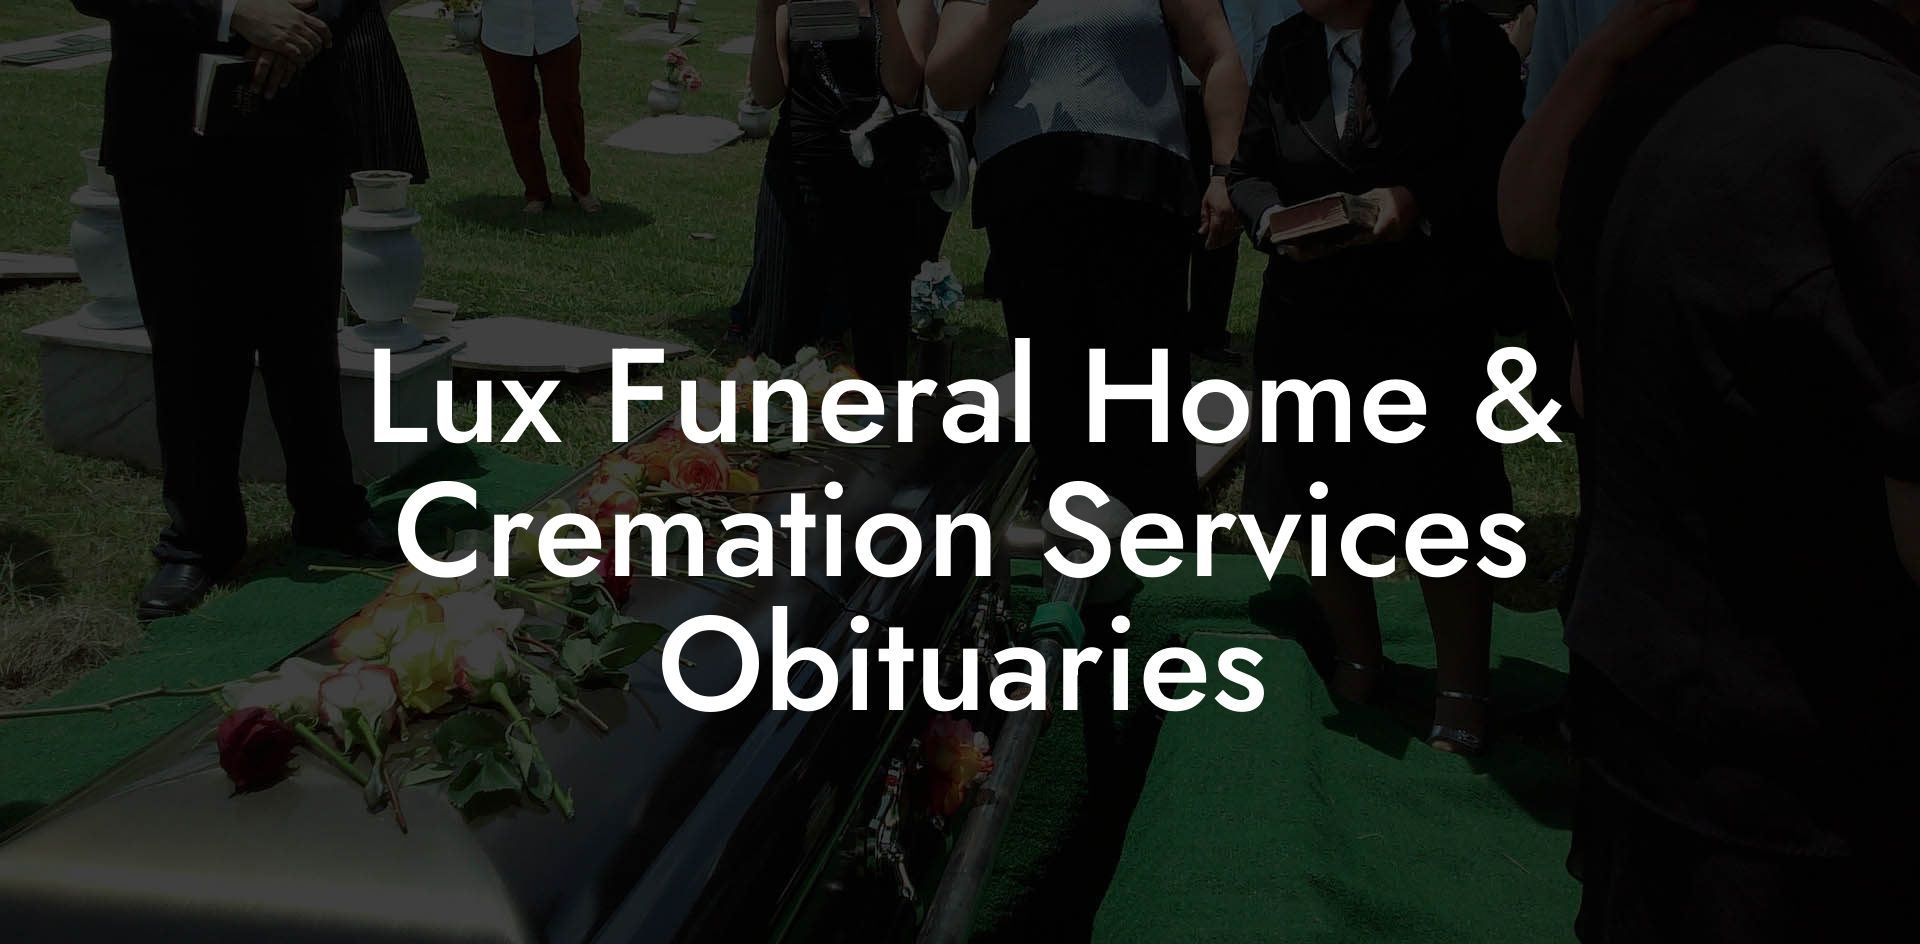 Lux Funeral Home & Cremation Services Obituaries